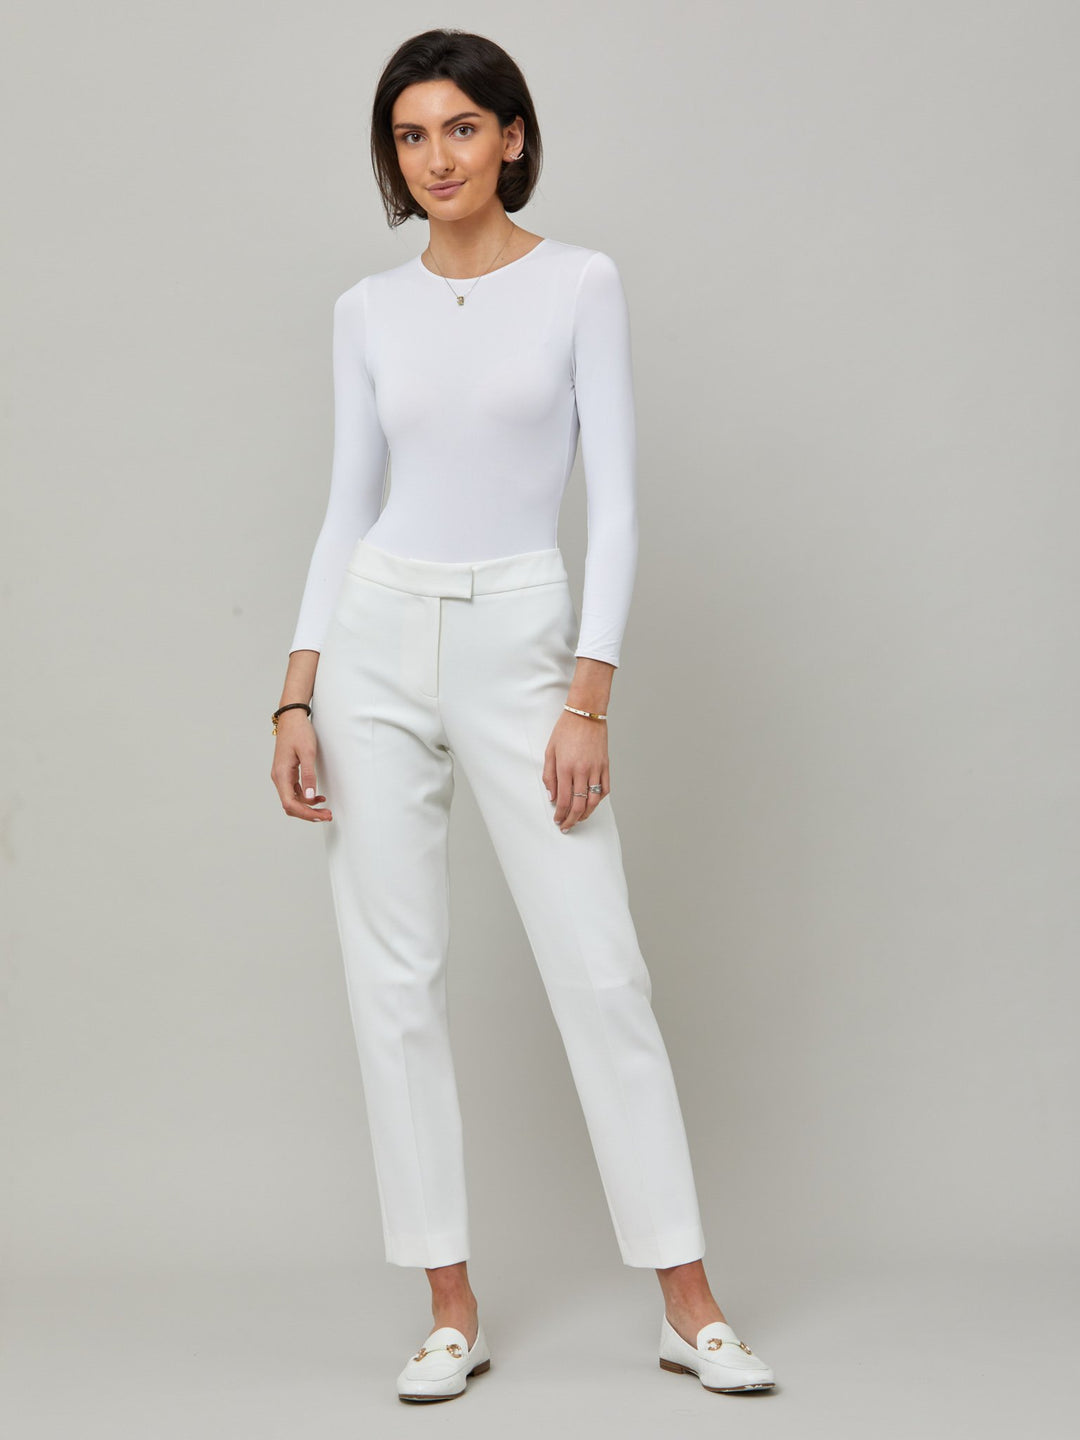 model wearing jill white pant  Investment-worthy, neat narrow-leg trouser with a hint of stretch. A wardrobe staple and HMcA classic, here in optical white.